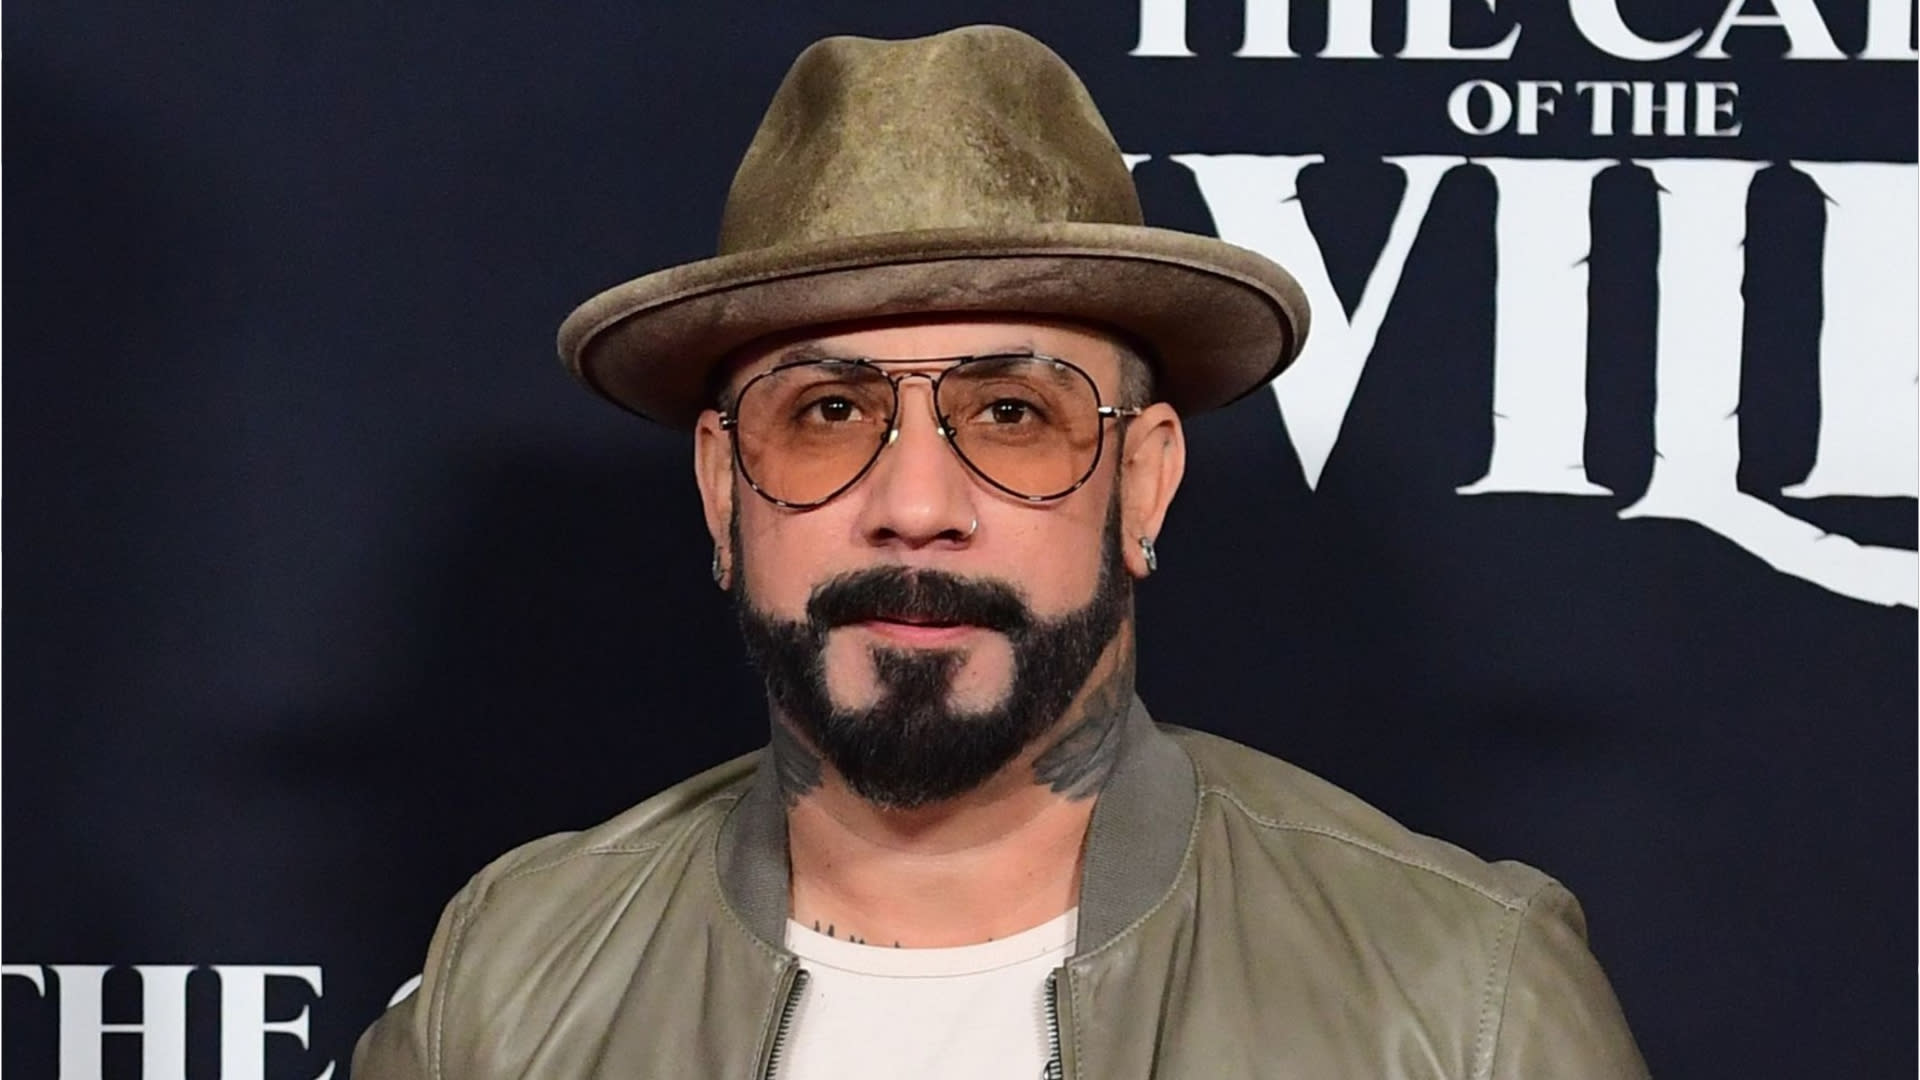 AJ McLean wearing a green jacket and green fedora hat